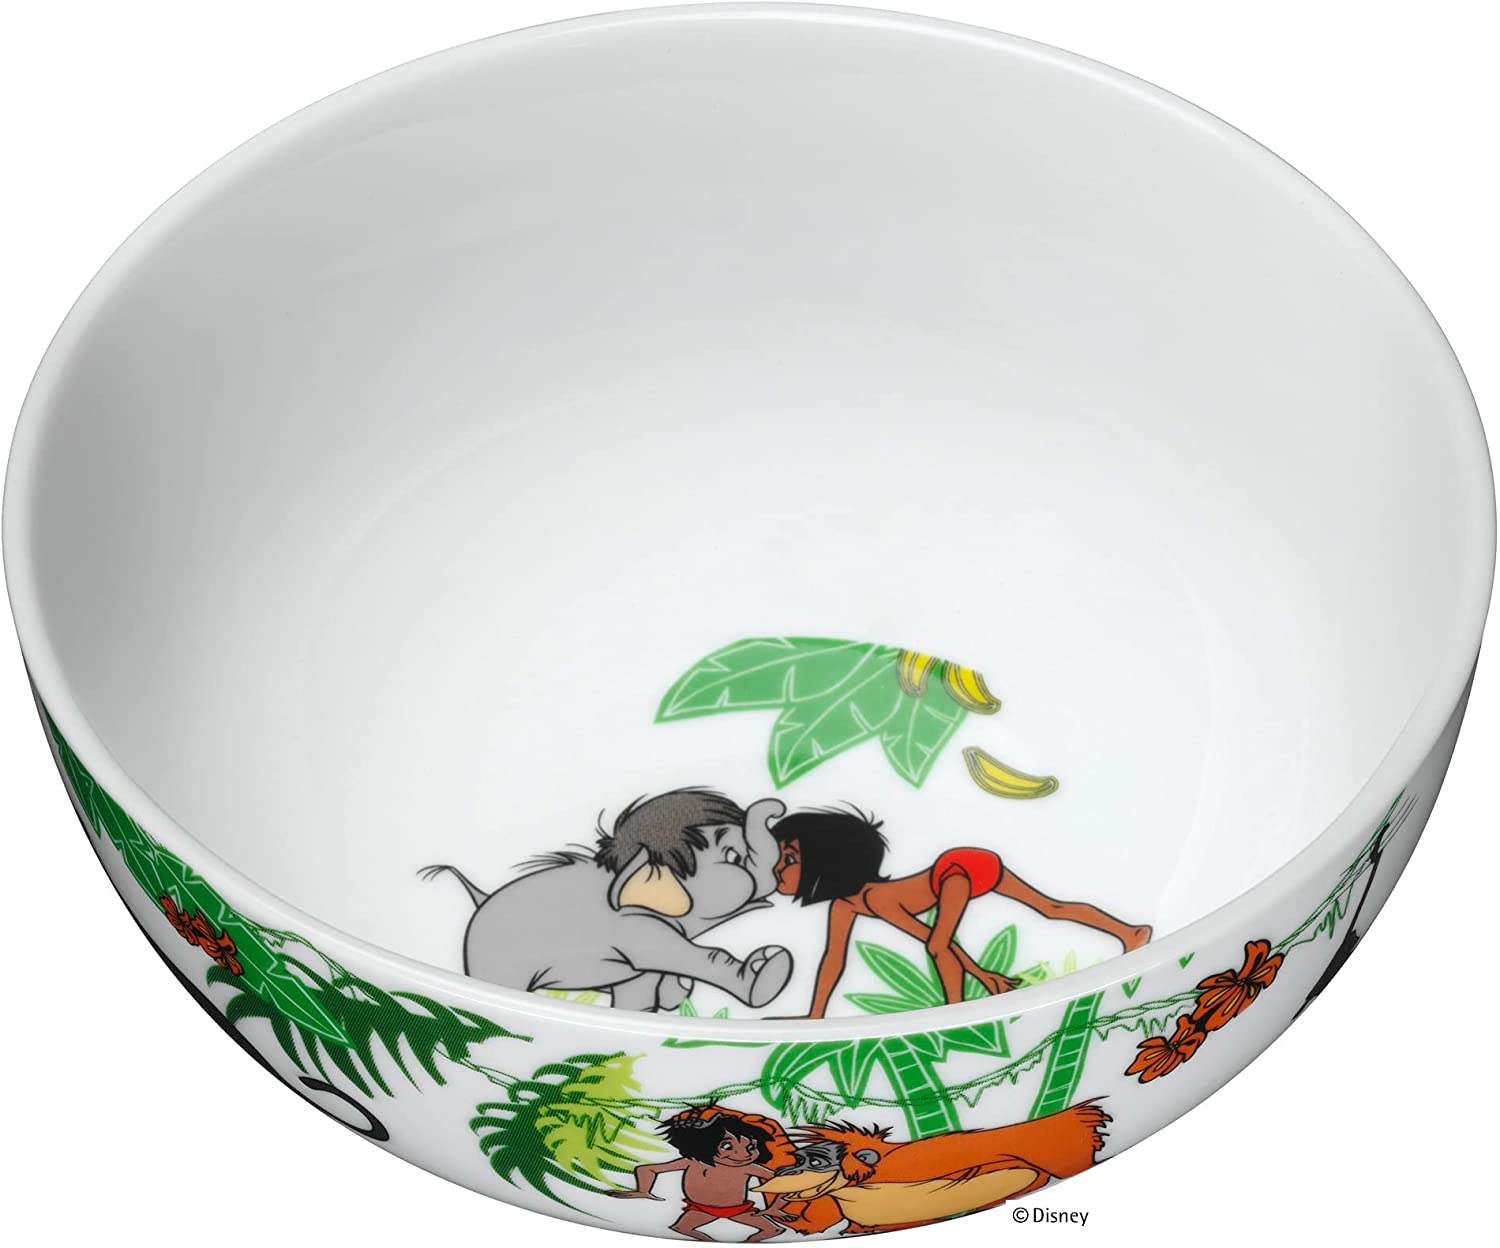 WMF 6045301290 Cereal Bowl with Jungle Book Design